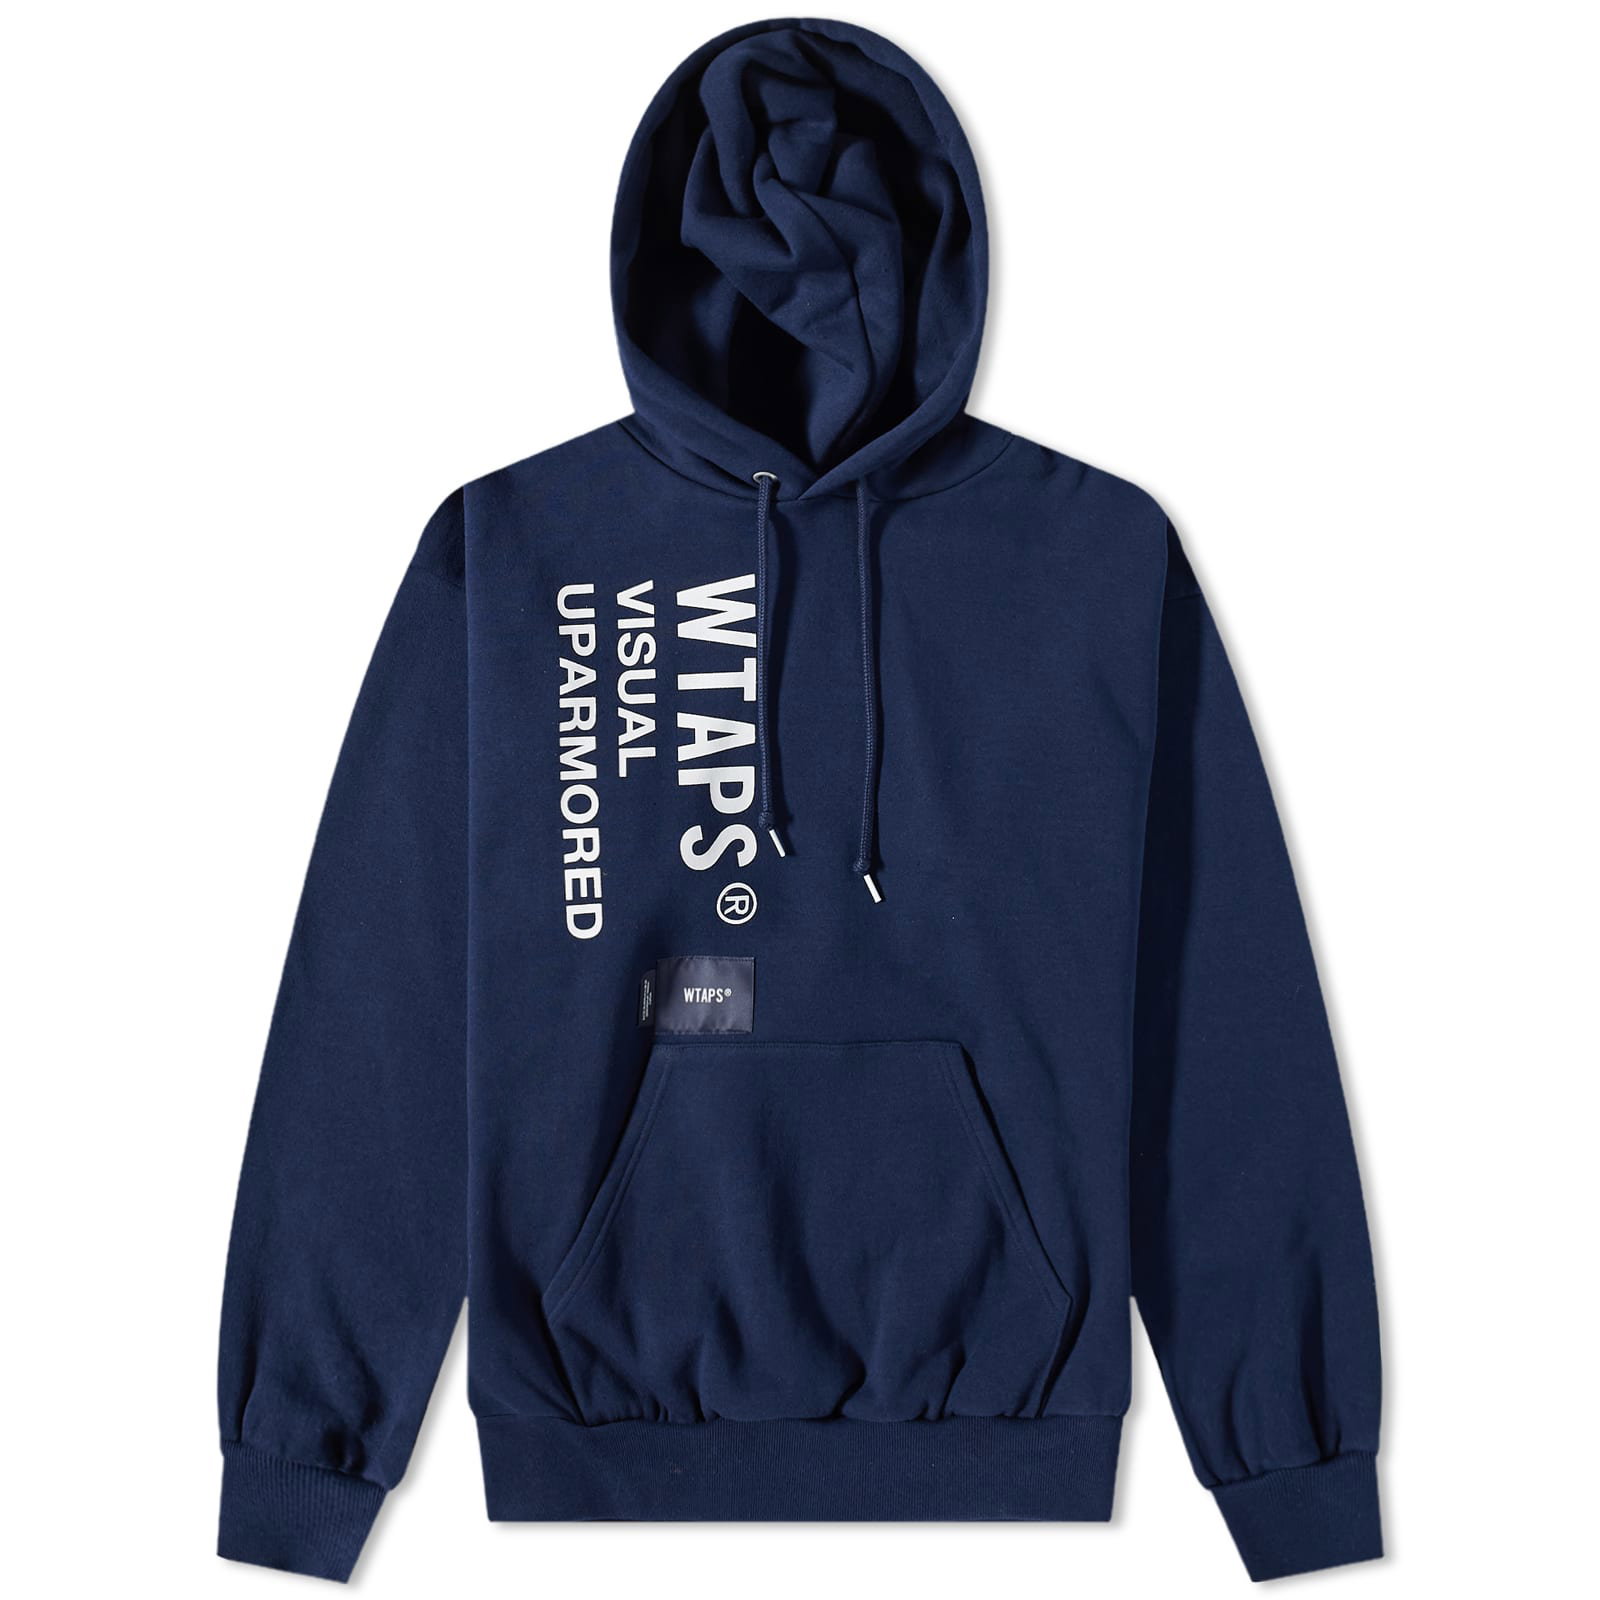 WTAPS VISUAL UPARMORED HOODY XL NAVY-